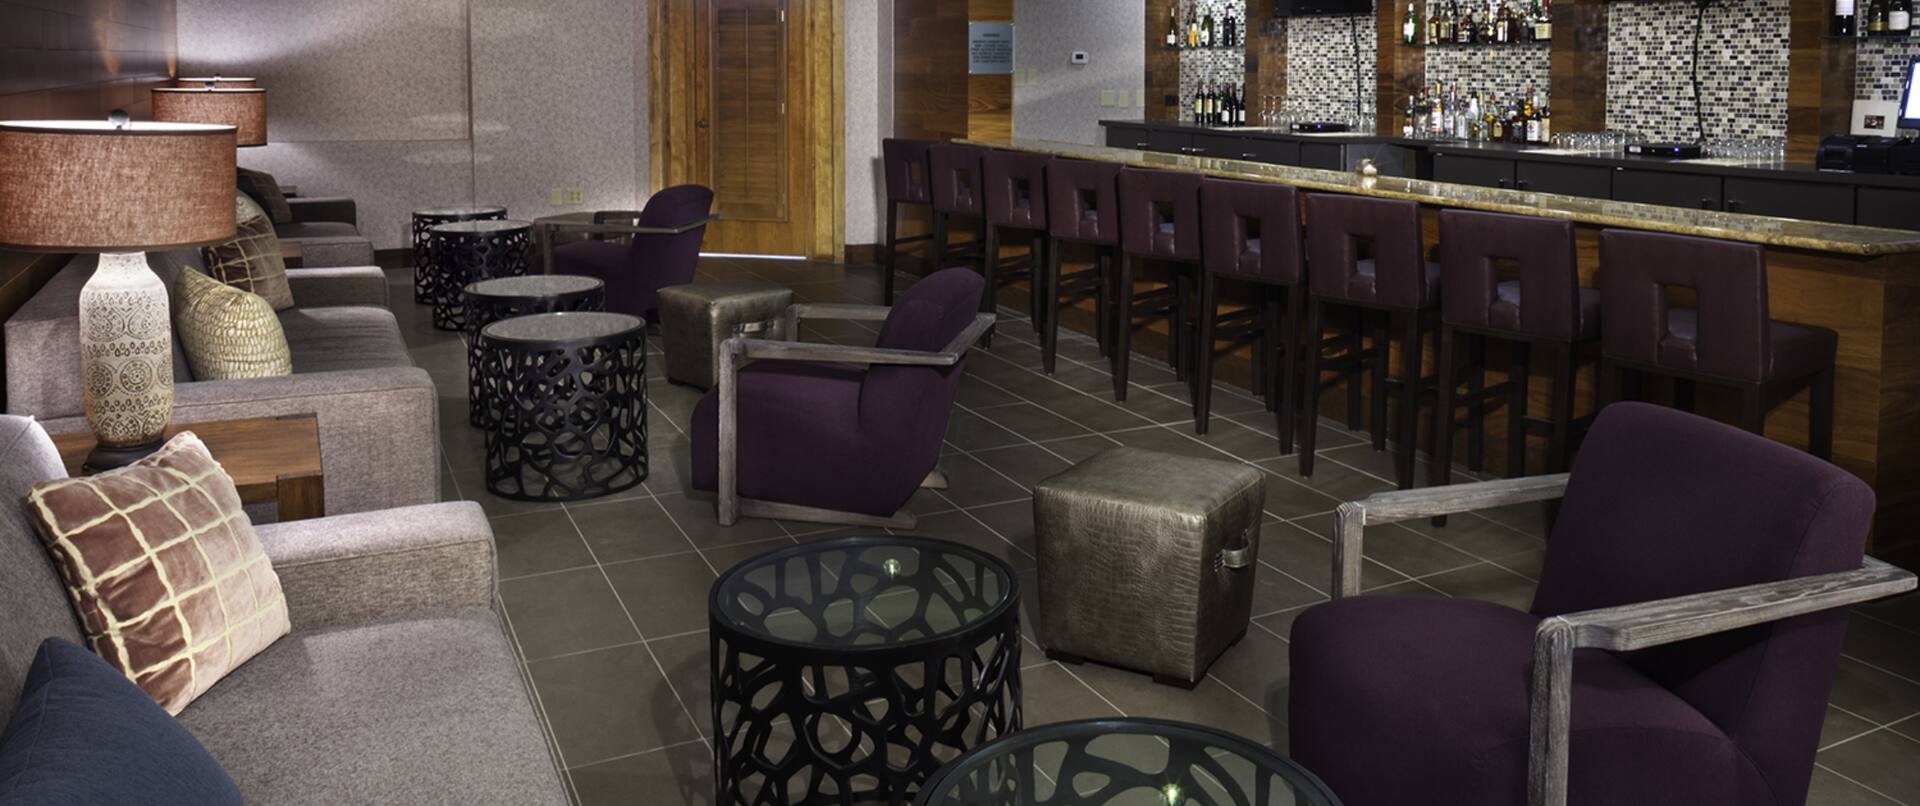 Soft Seating in Lounge Area and Counter Seating at Fully Stocked Prime 1079 Bar WIth TVs